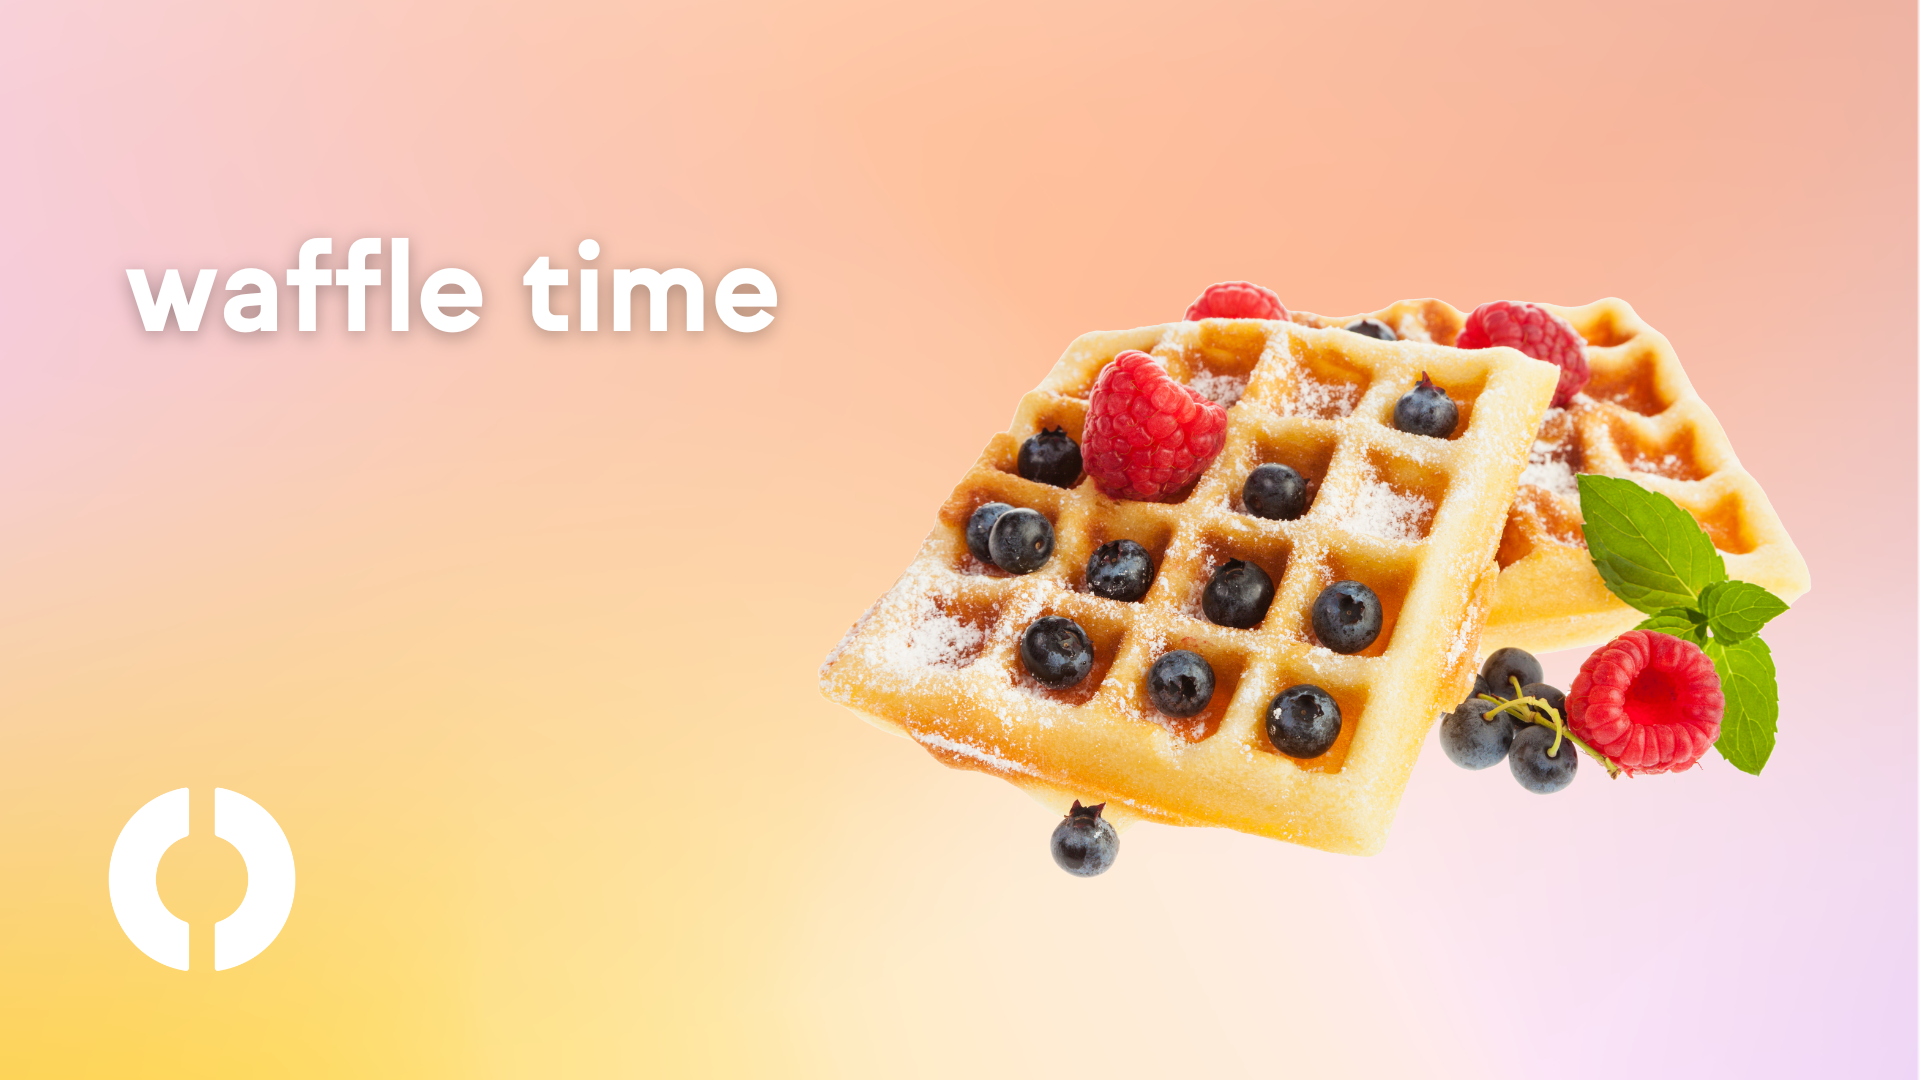 A photo of two fresh waffles with blueberries and raspberries in the waffles slots, as well as sprinkles of powdered sugar. The graphic has a yellow and pink gradient, with text that reads "waffle time" on the top left corner, and an allcove logo mark on the bottom left corner.